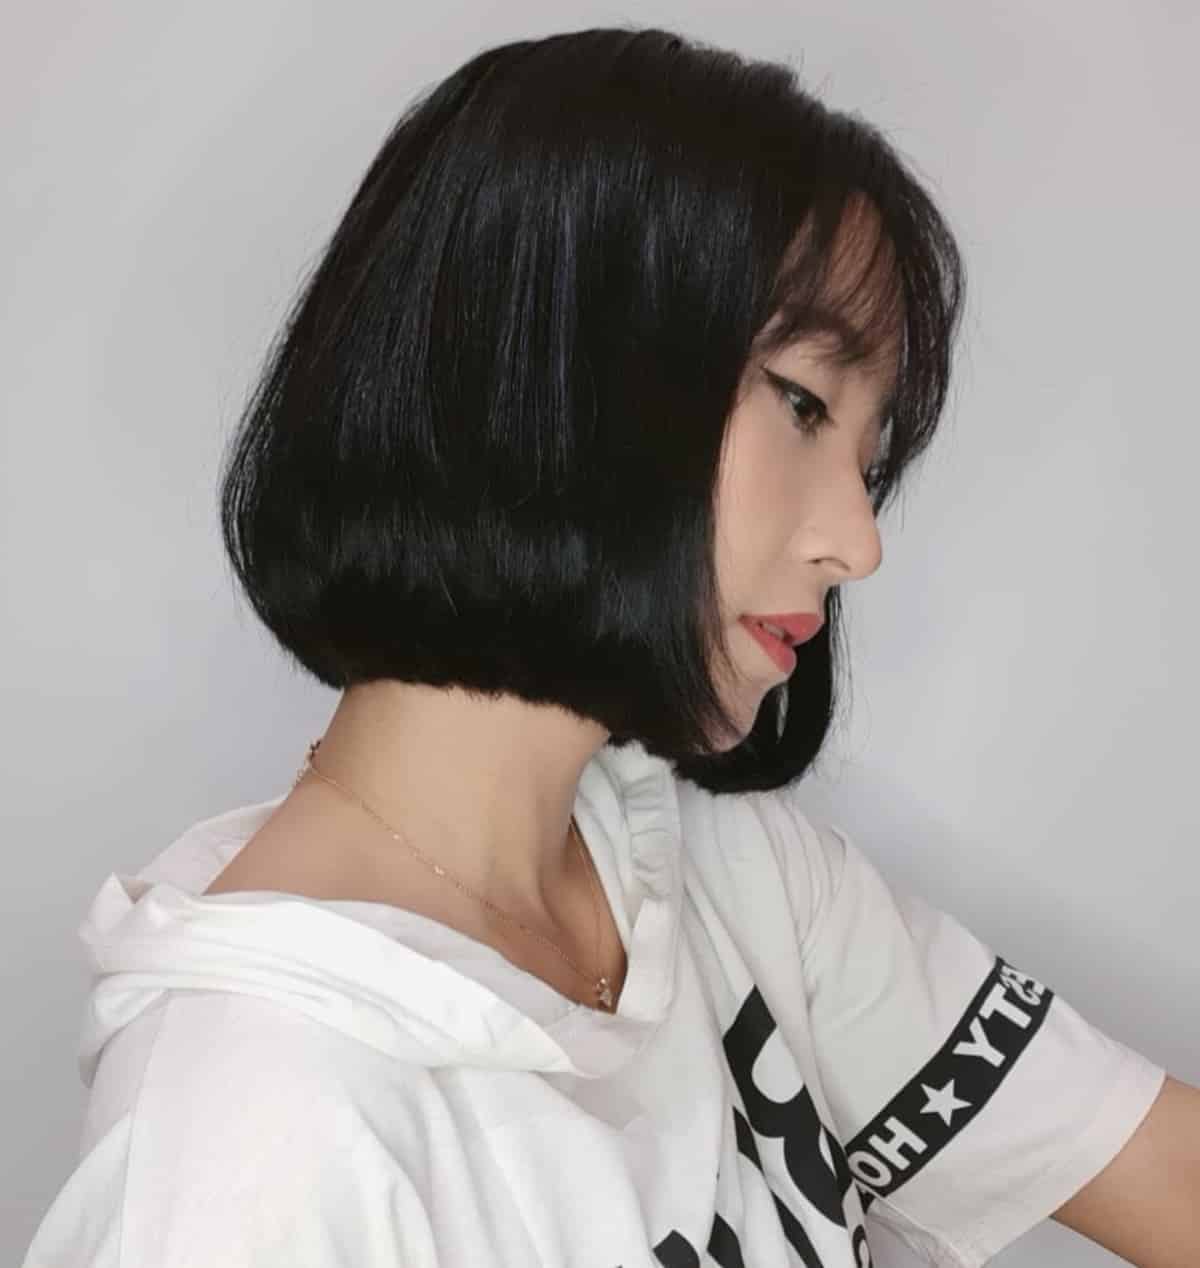 53 Best Short Blunt Bob Haircuts Ideas For Women of All Ages